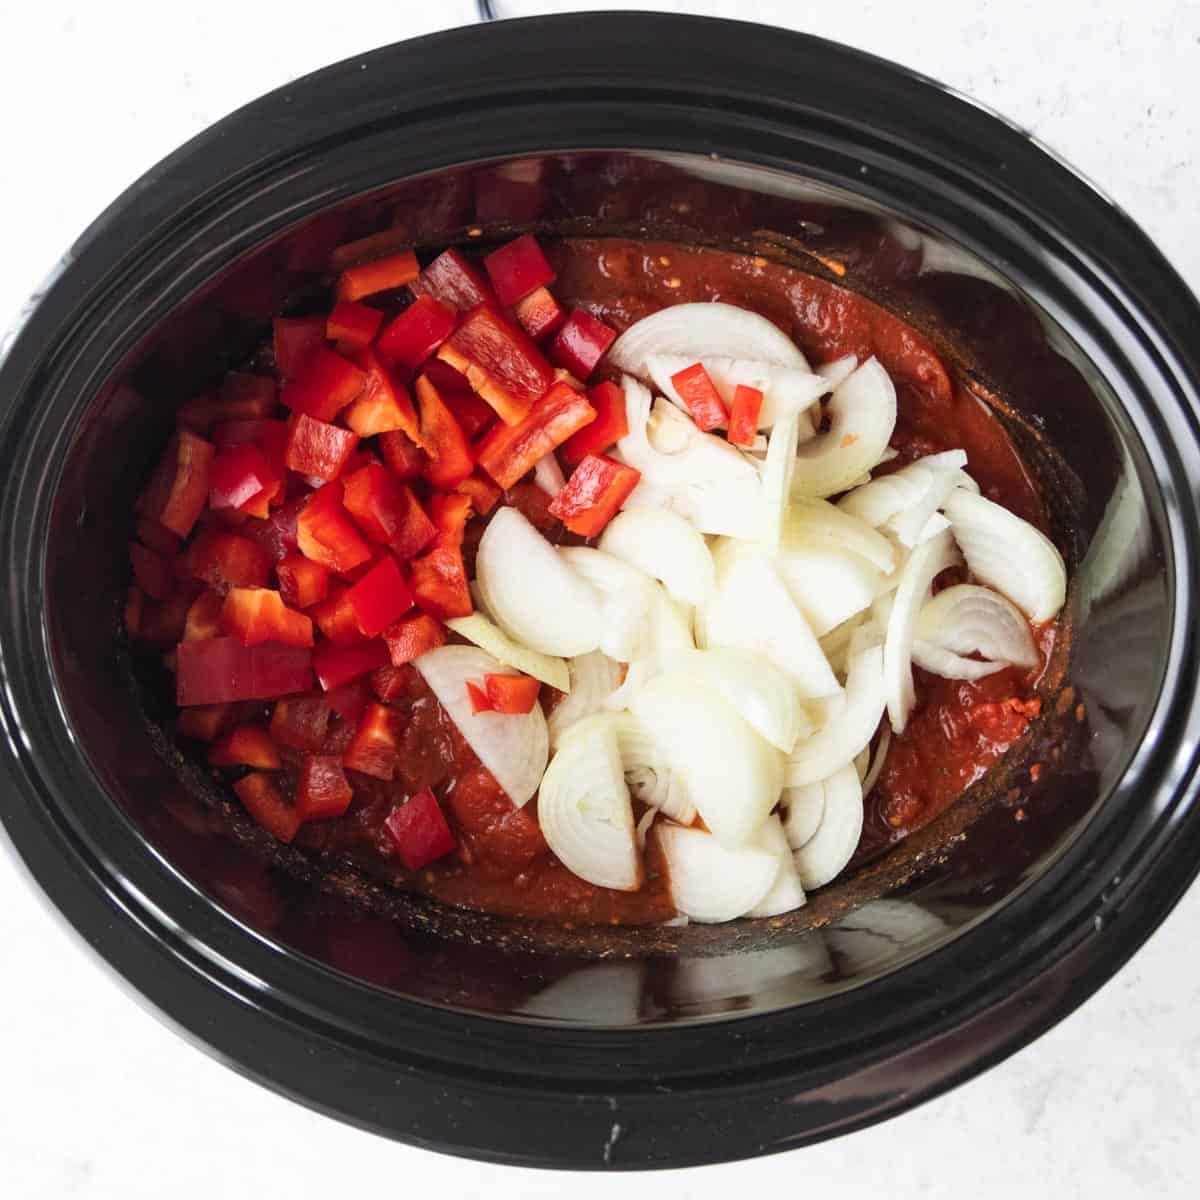 diced red peppers, sliced onions and tomato sauce in slow cooker